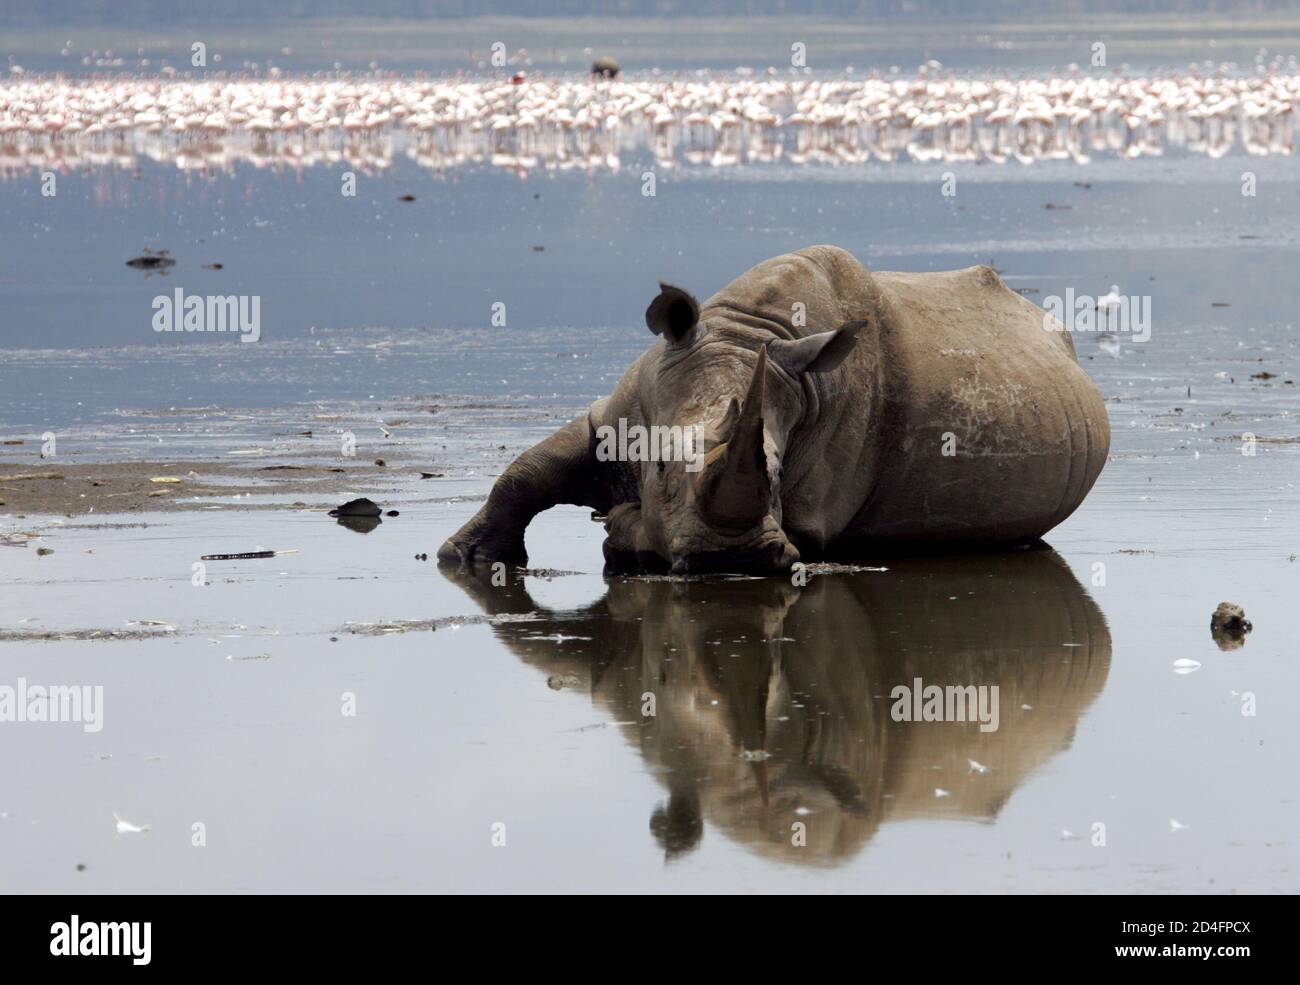 A square-lipped or white rhinoceros cools himself in the water of lake Nakuru, 120 km (74 miles) west of Kenya's capital Nairobi in this picture taken on January 8, 2005. A new wave of poaching activities in key wildlife habitats in Kenya has killed several Elephants and Rhinos, the country's wildlife agency Kenya Wildlife Services (KWS) said. Even though Kenya has declared its elephants and rhinos endangered species and banned any trade on them or their products, the animals remain highly vulnerable to poaching, despite efforts by KWS to safeguard them. Kenya lost 15 of its 450 rhinos to poac Stock Photo